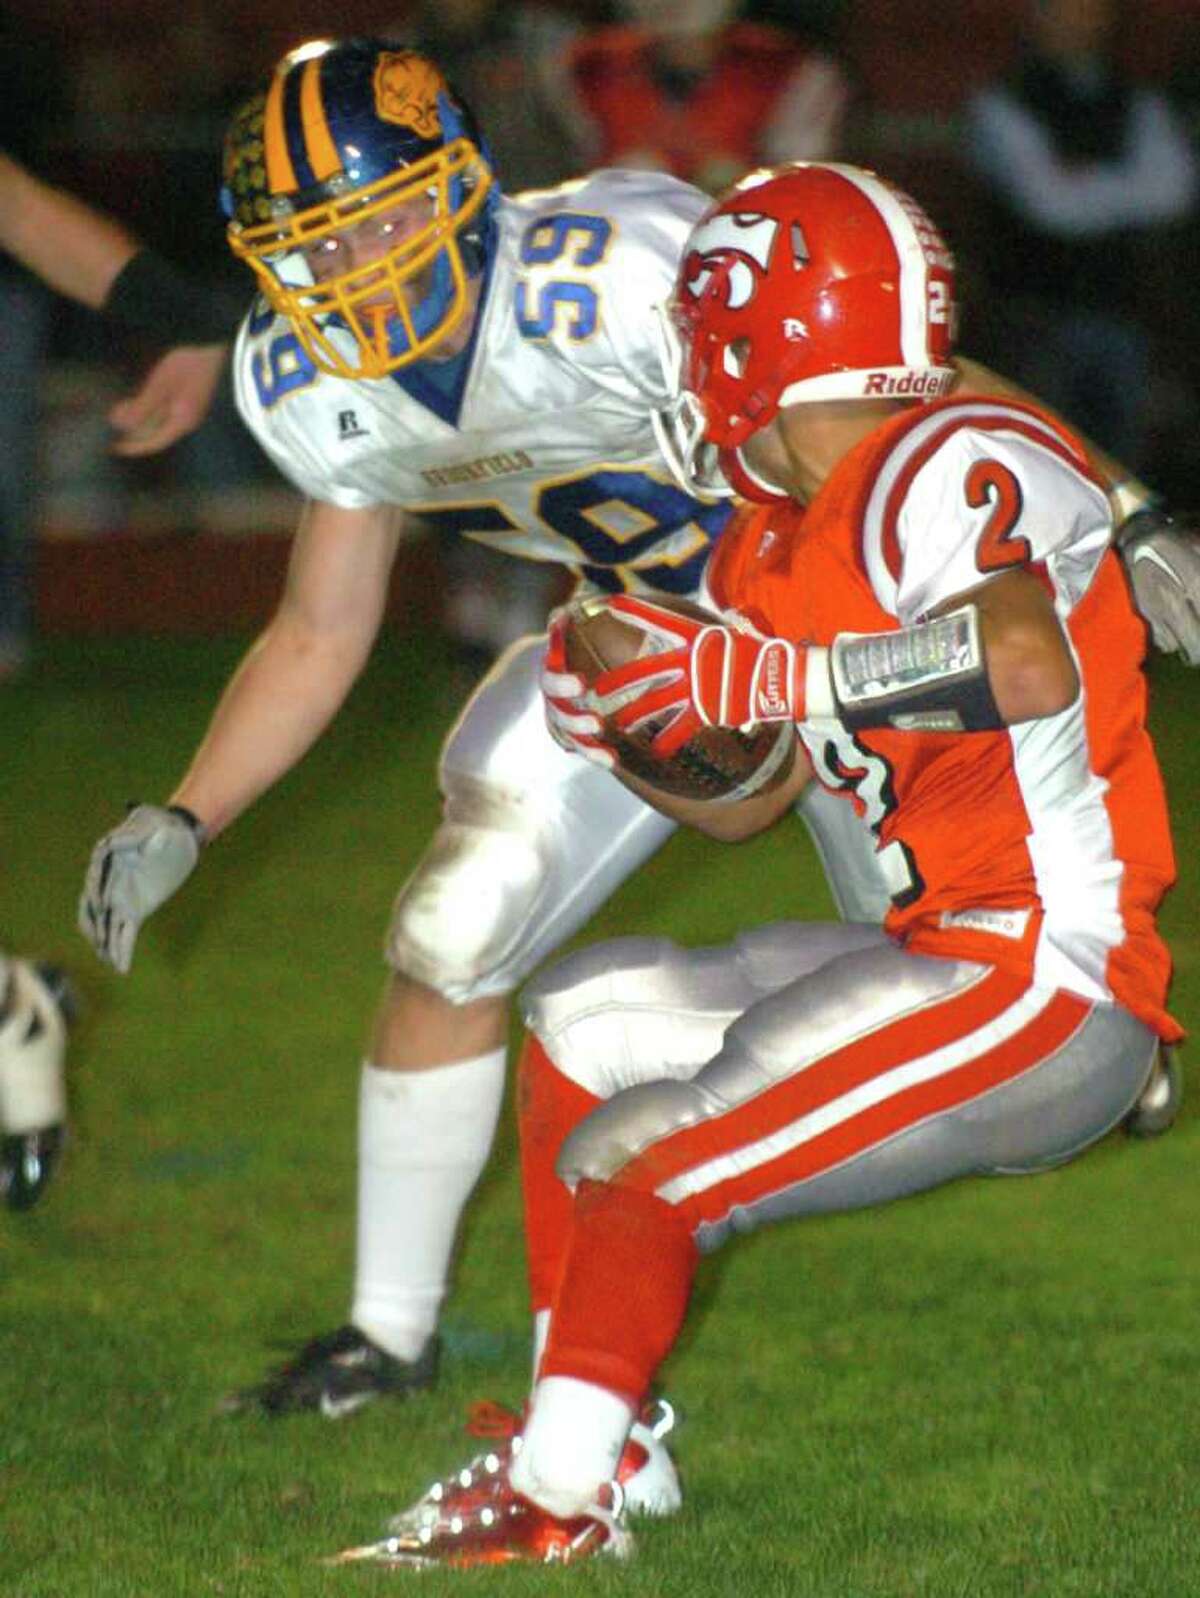 Masuk's 2, Tyler Perimenis, sets up for a pass while Brookfield's 59, Tyler Heckmann, blocks during the football game against Brookfield at Masuk Oct. 8, 2010.